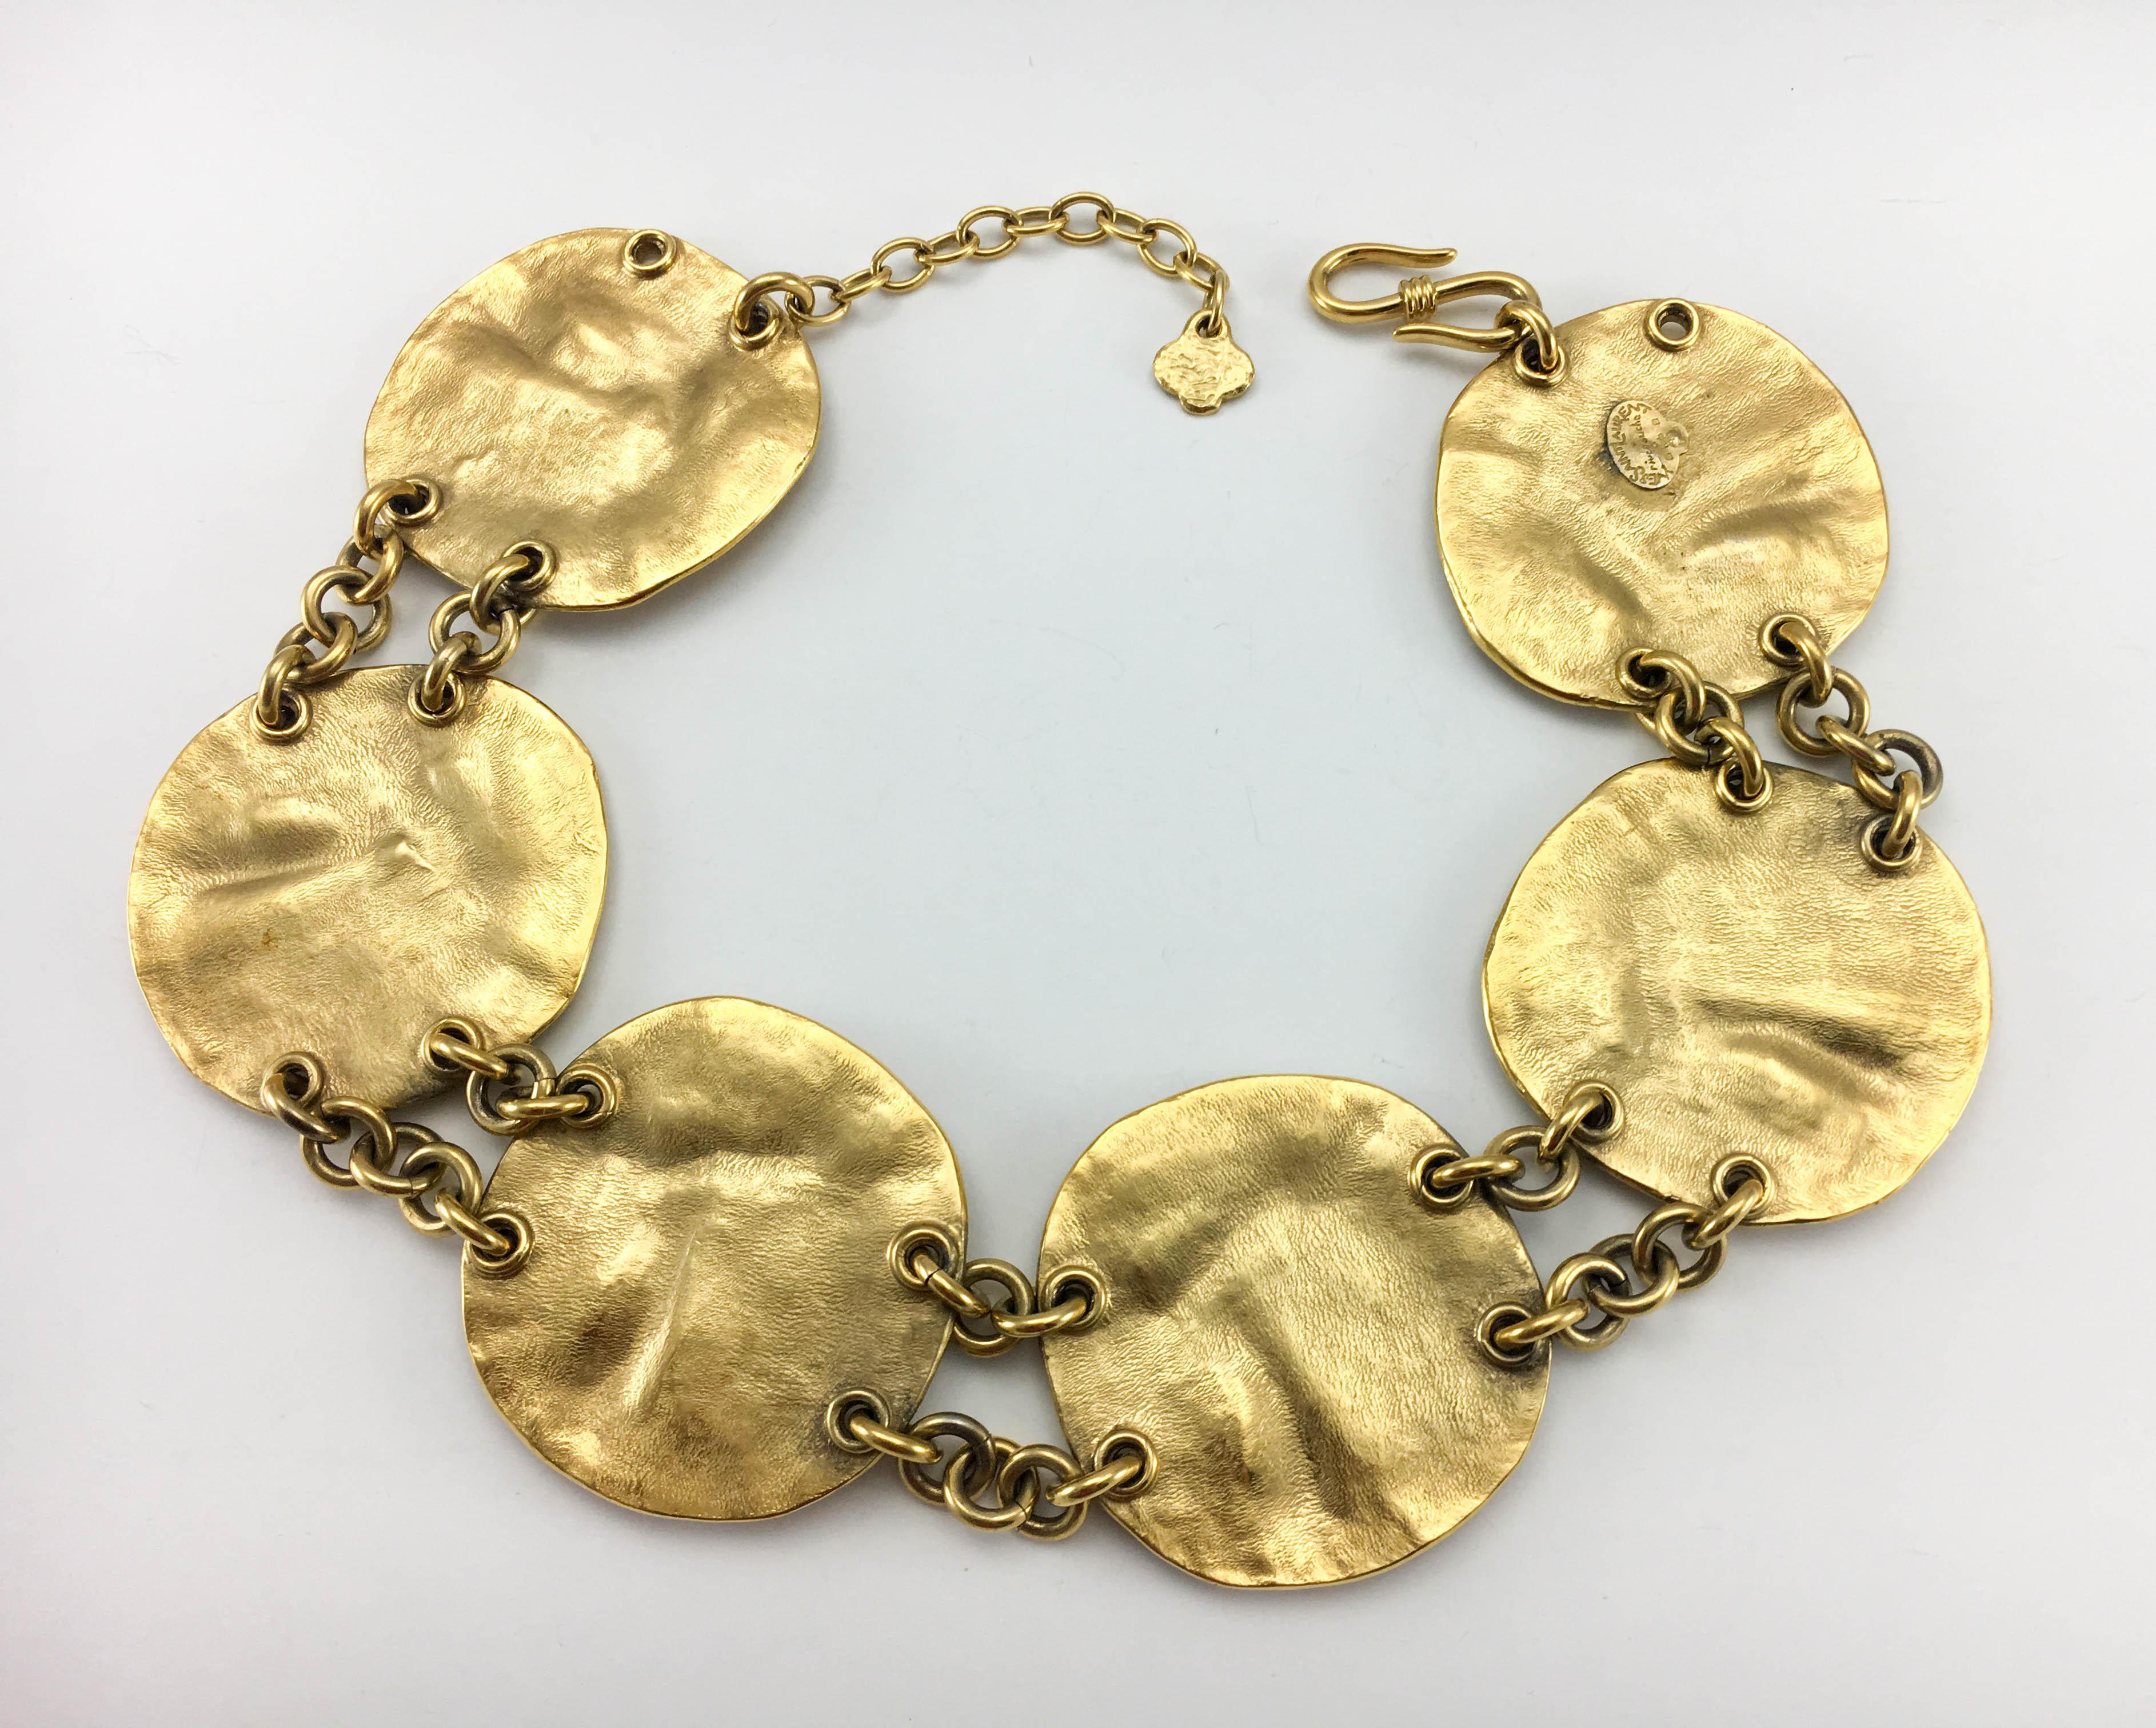 Yves Saint Laurent by Robert Goossens Gold-Plated Disk Necklace, 1989   5